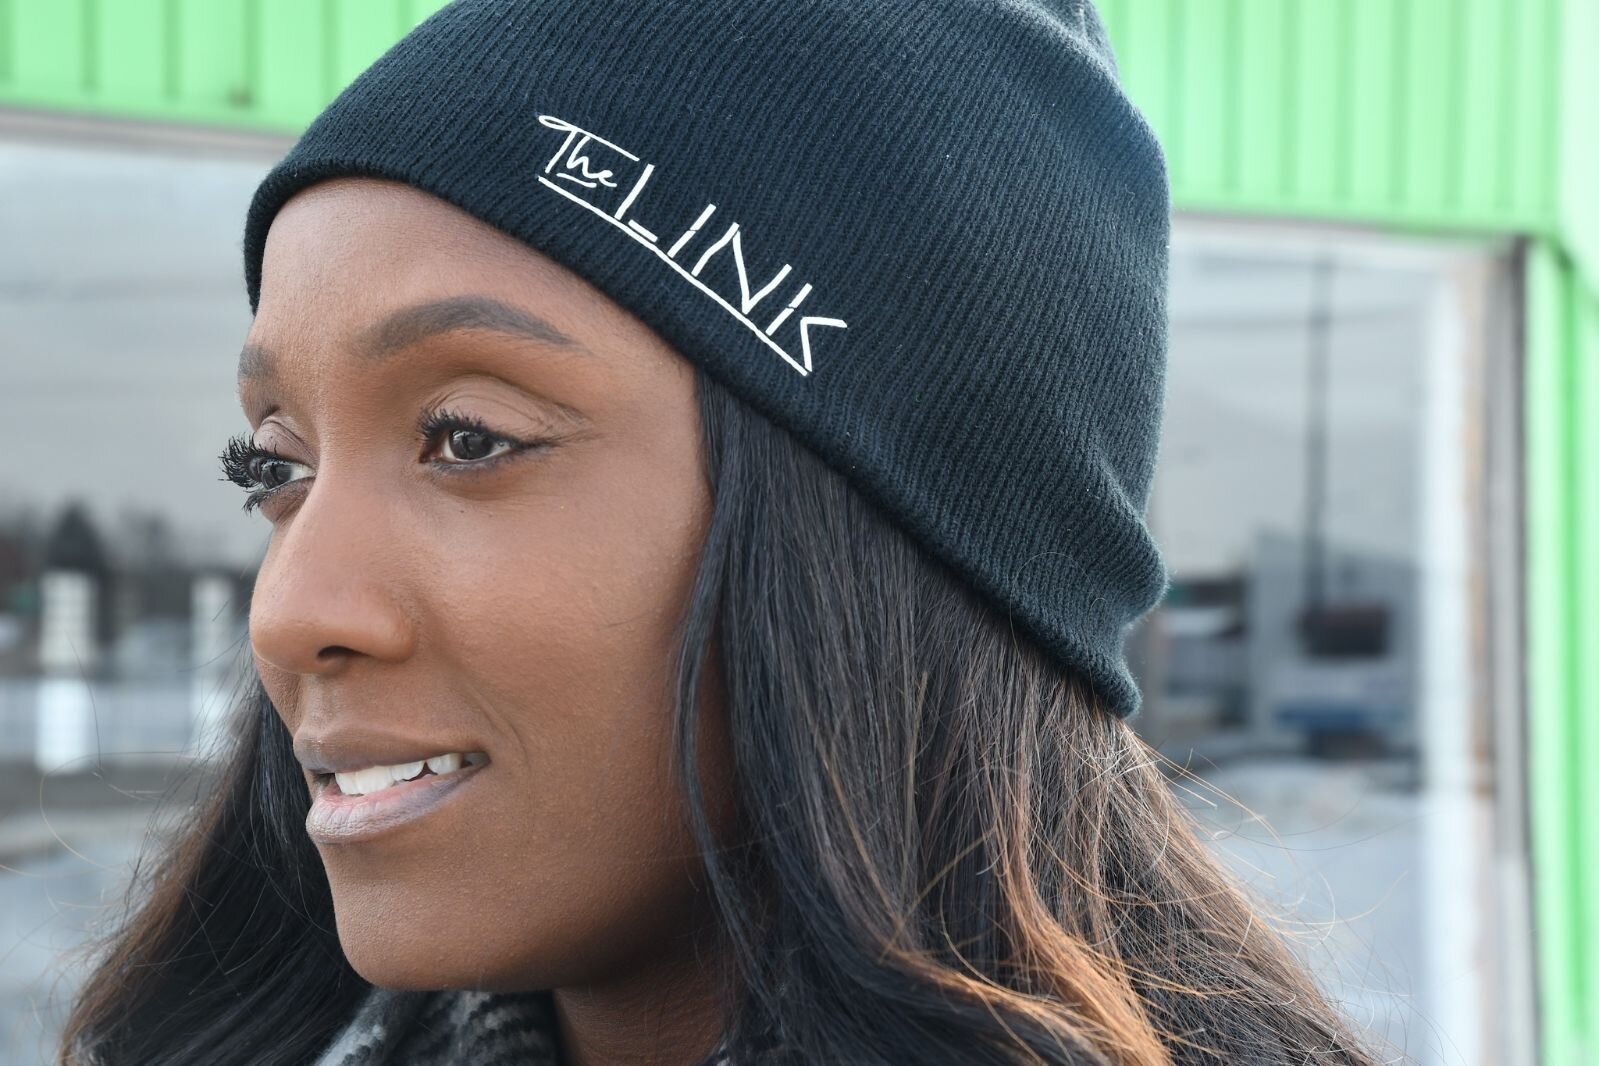 Tonesha Heath wears a knit hat bearing the logo for her business.